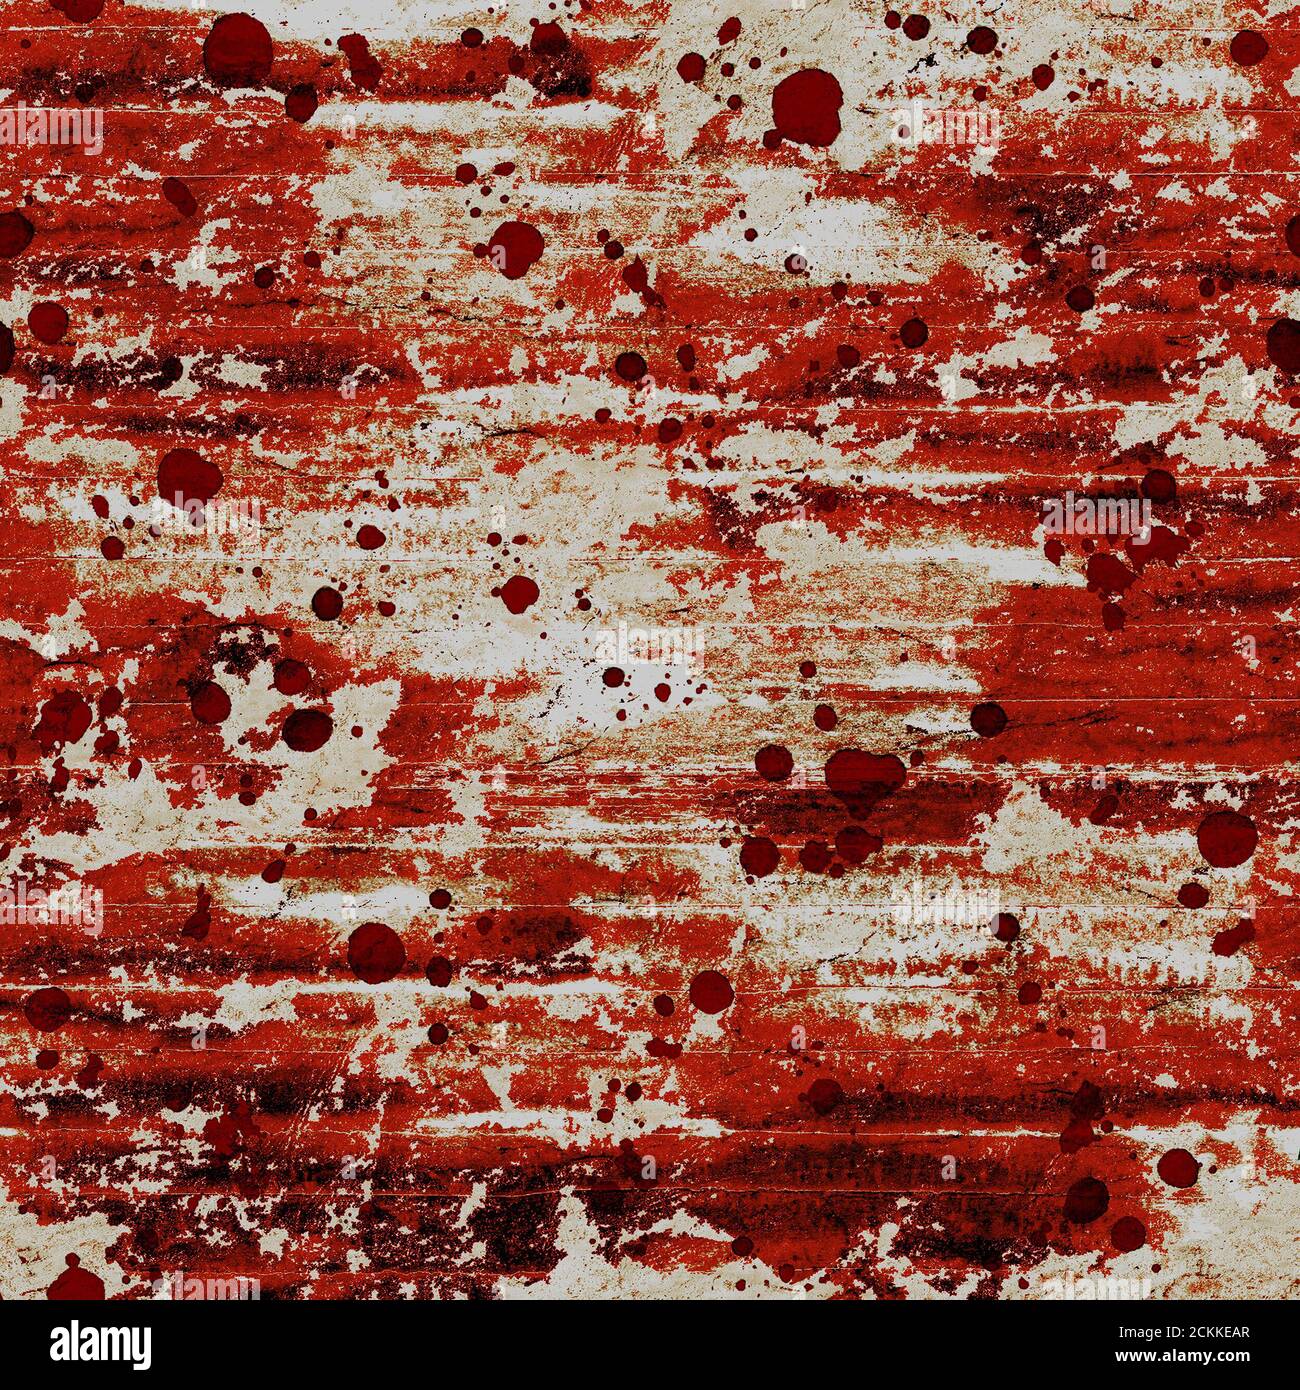 Bloody blood red grunge background. Watercolor aged wood abstract seamless pattern with red blood blots. Watercolour textured illustration. Art rough Stock Photo